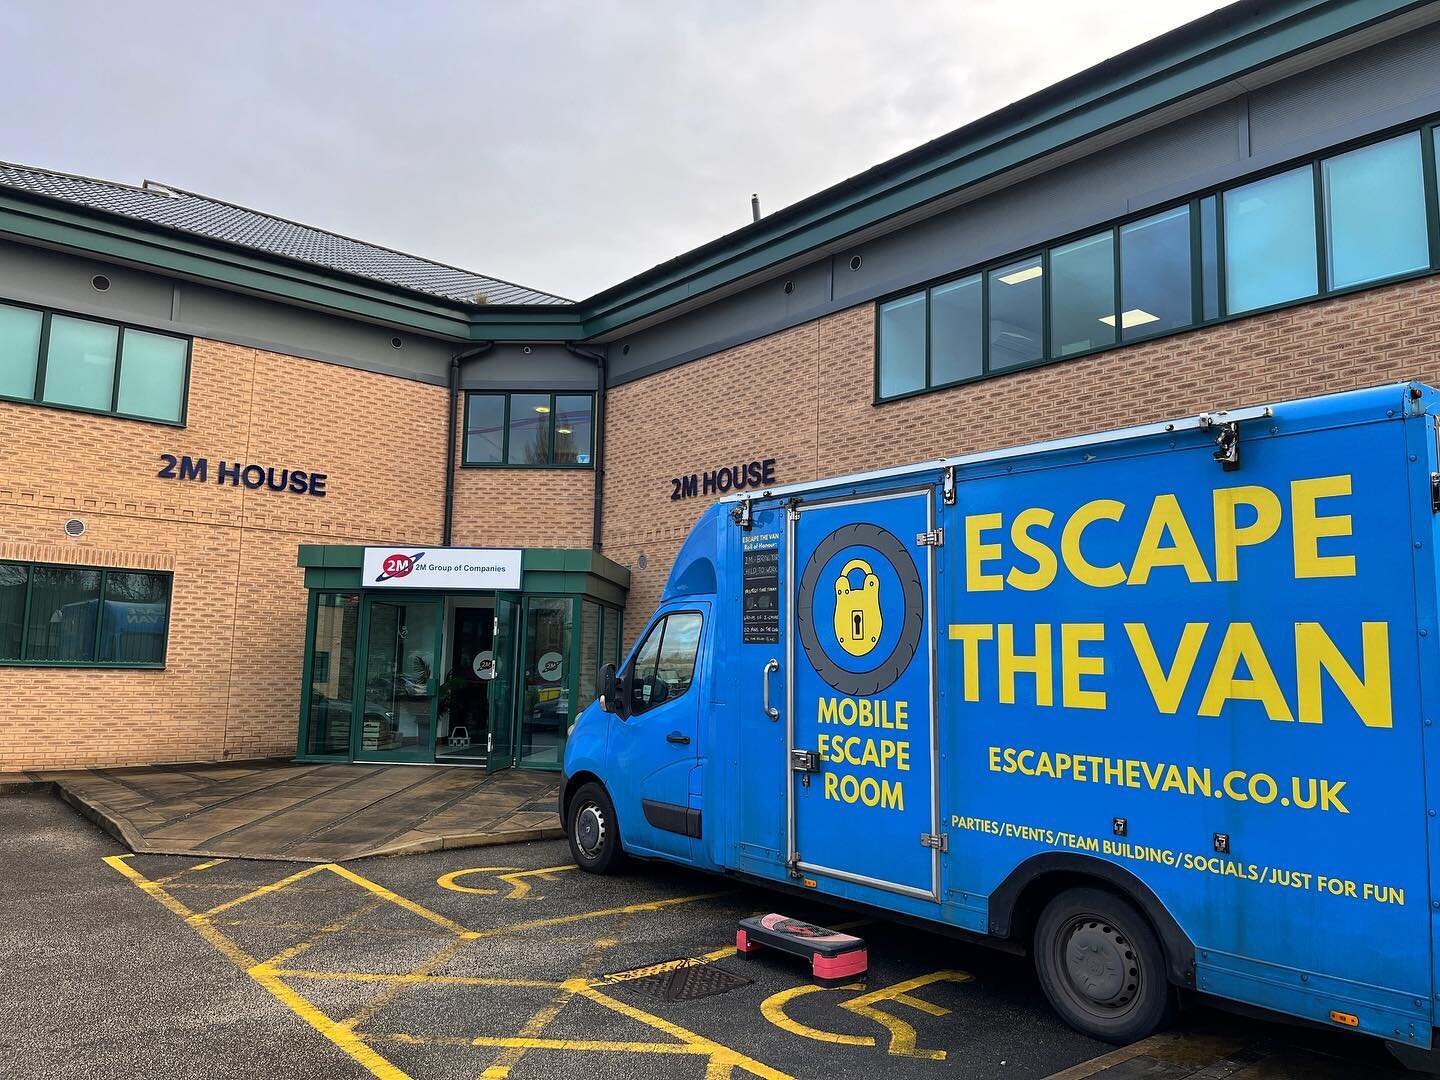 Today we&rsquo;re at 2M House for their &lsquo;Bring Your Child to Work&rsquo; day!

Our laboratory-themed escape room is perfect for 2M and Banner Chemicals Group to help engage the next generation in all things science and STEM-related, in the worl